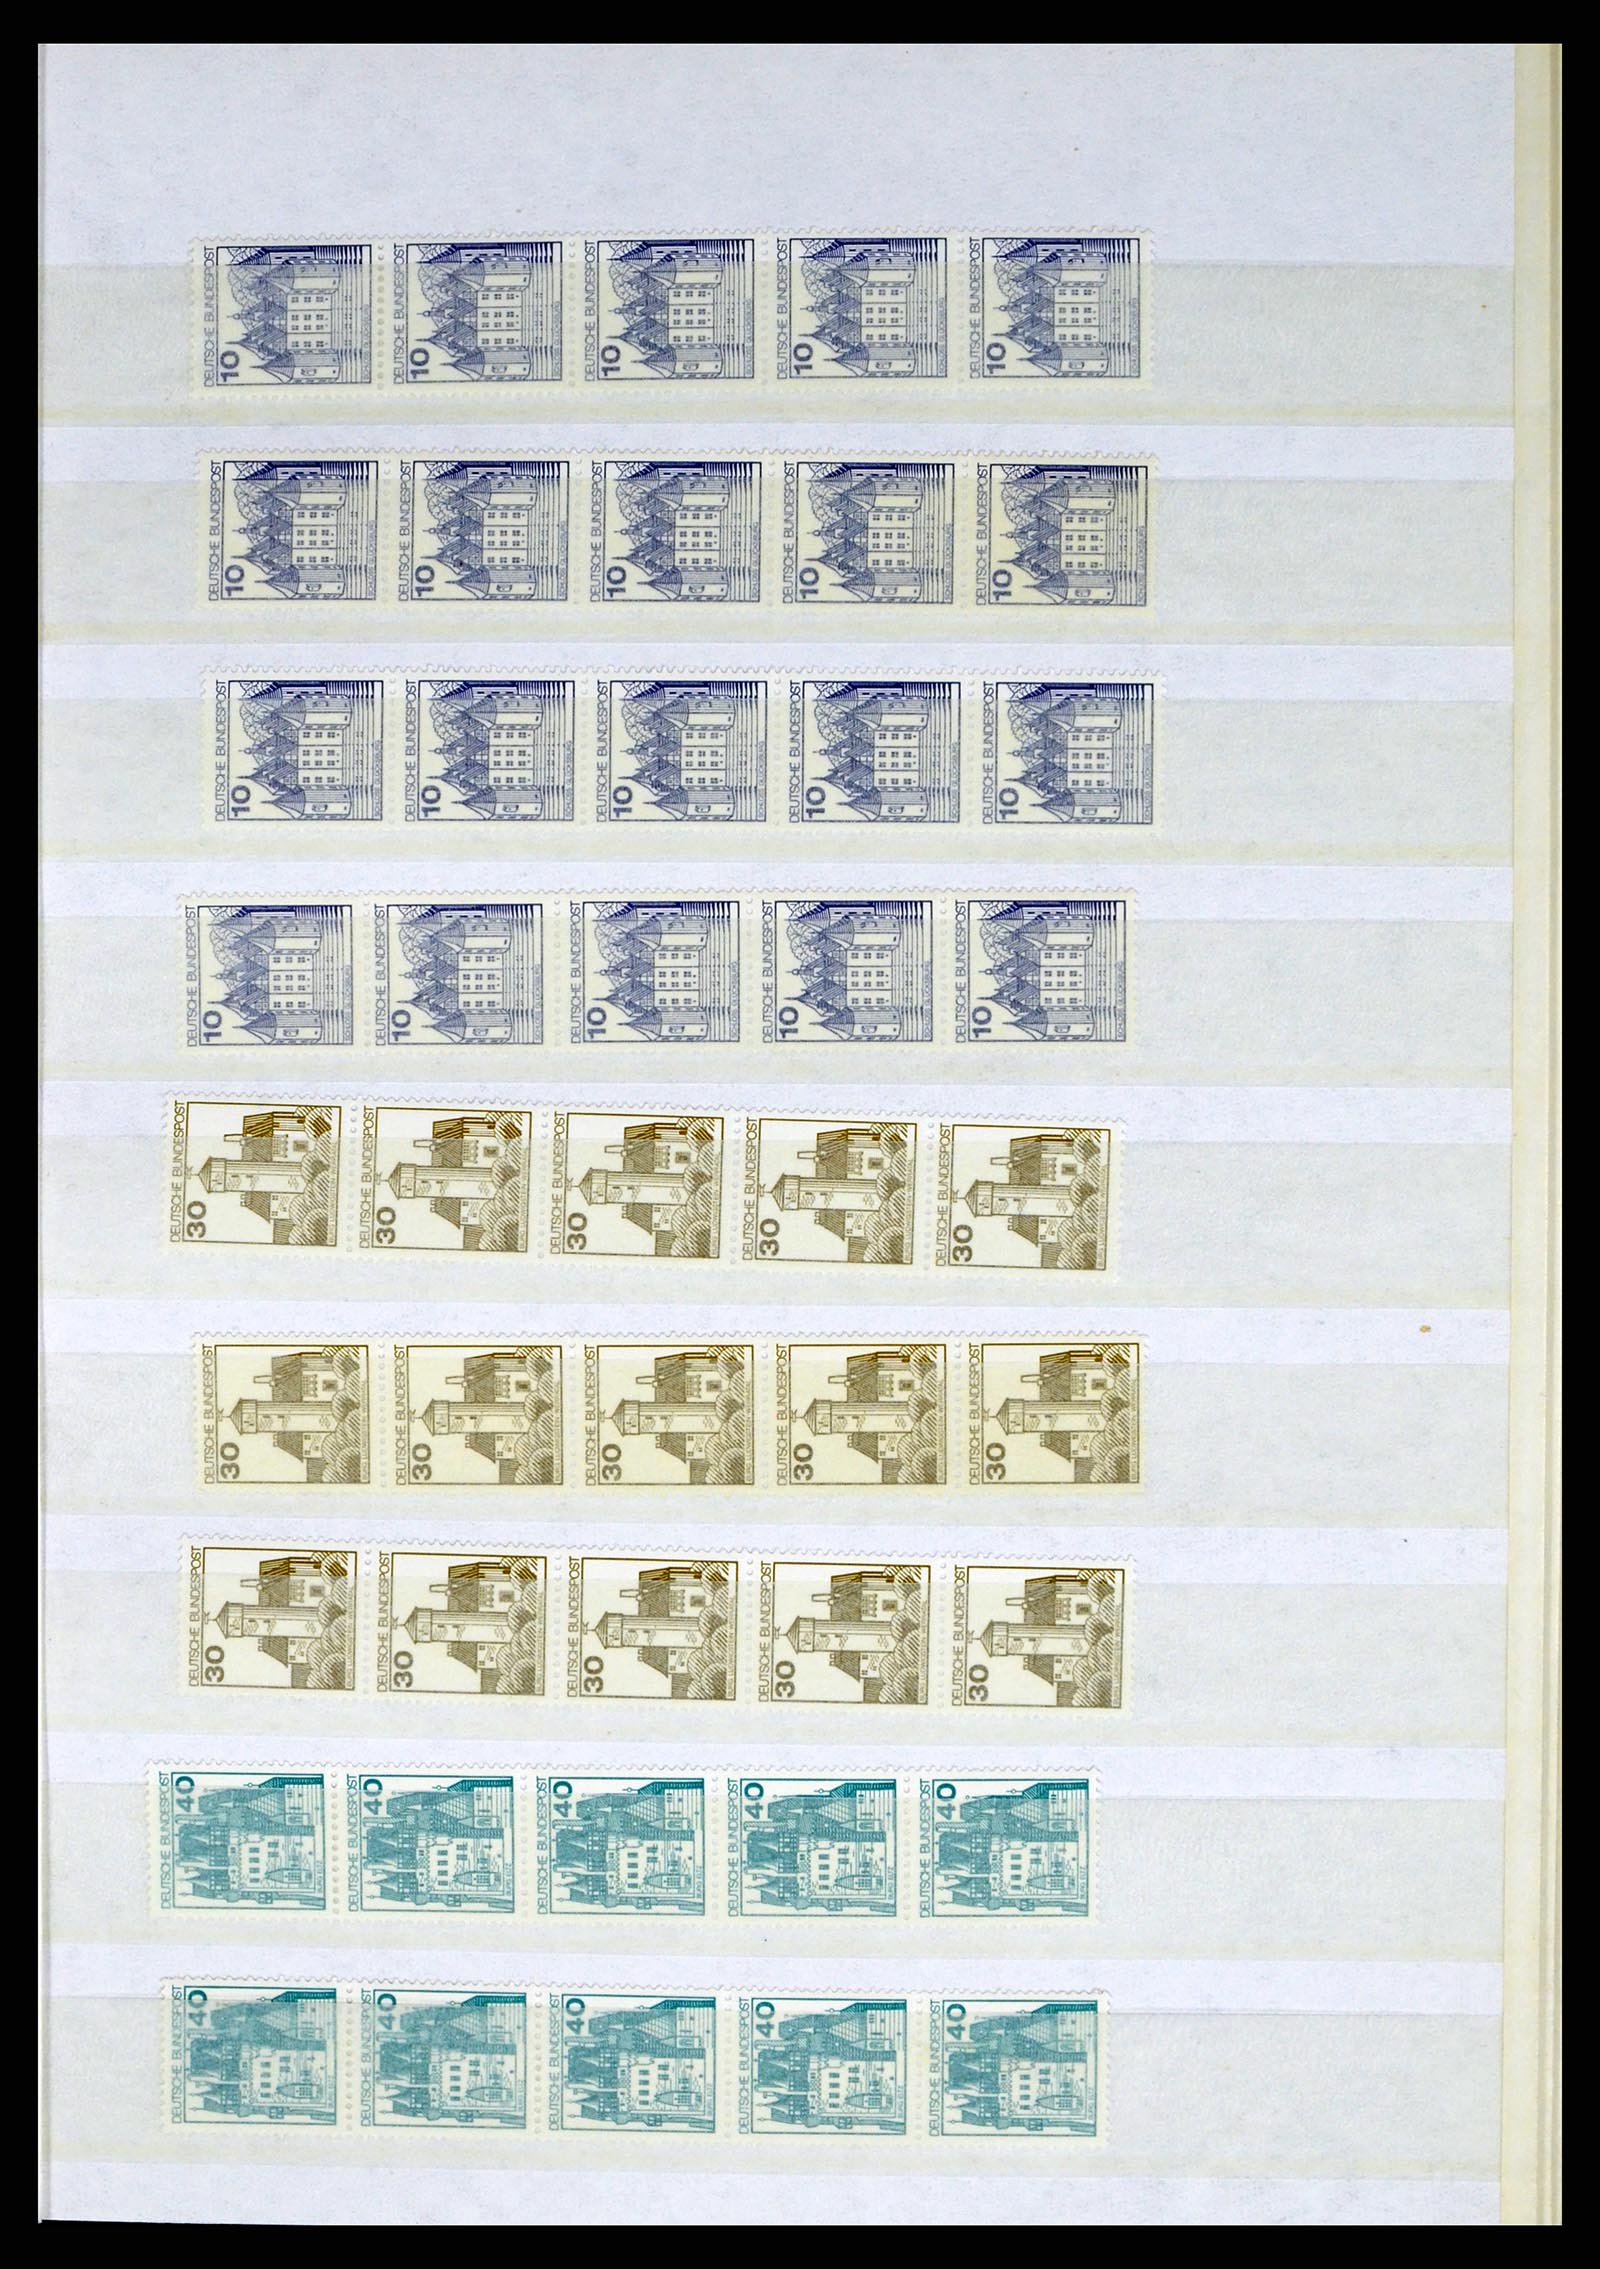 37354 063 - Stamp collection 37354 Bundespost and Berlin 1955-2000.